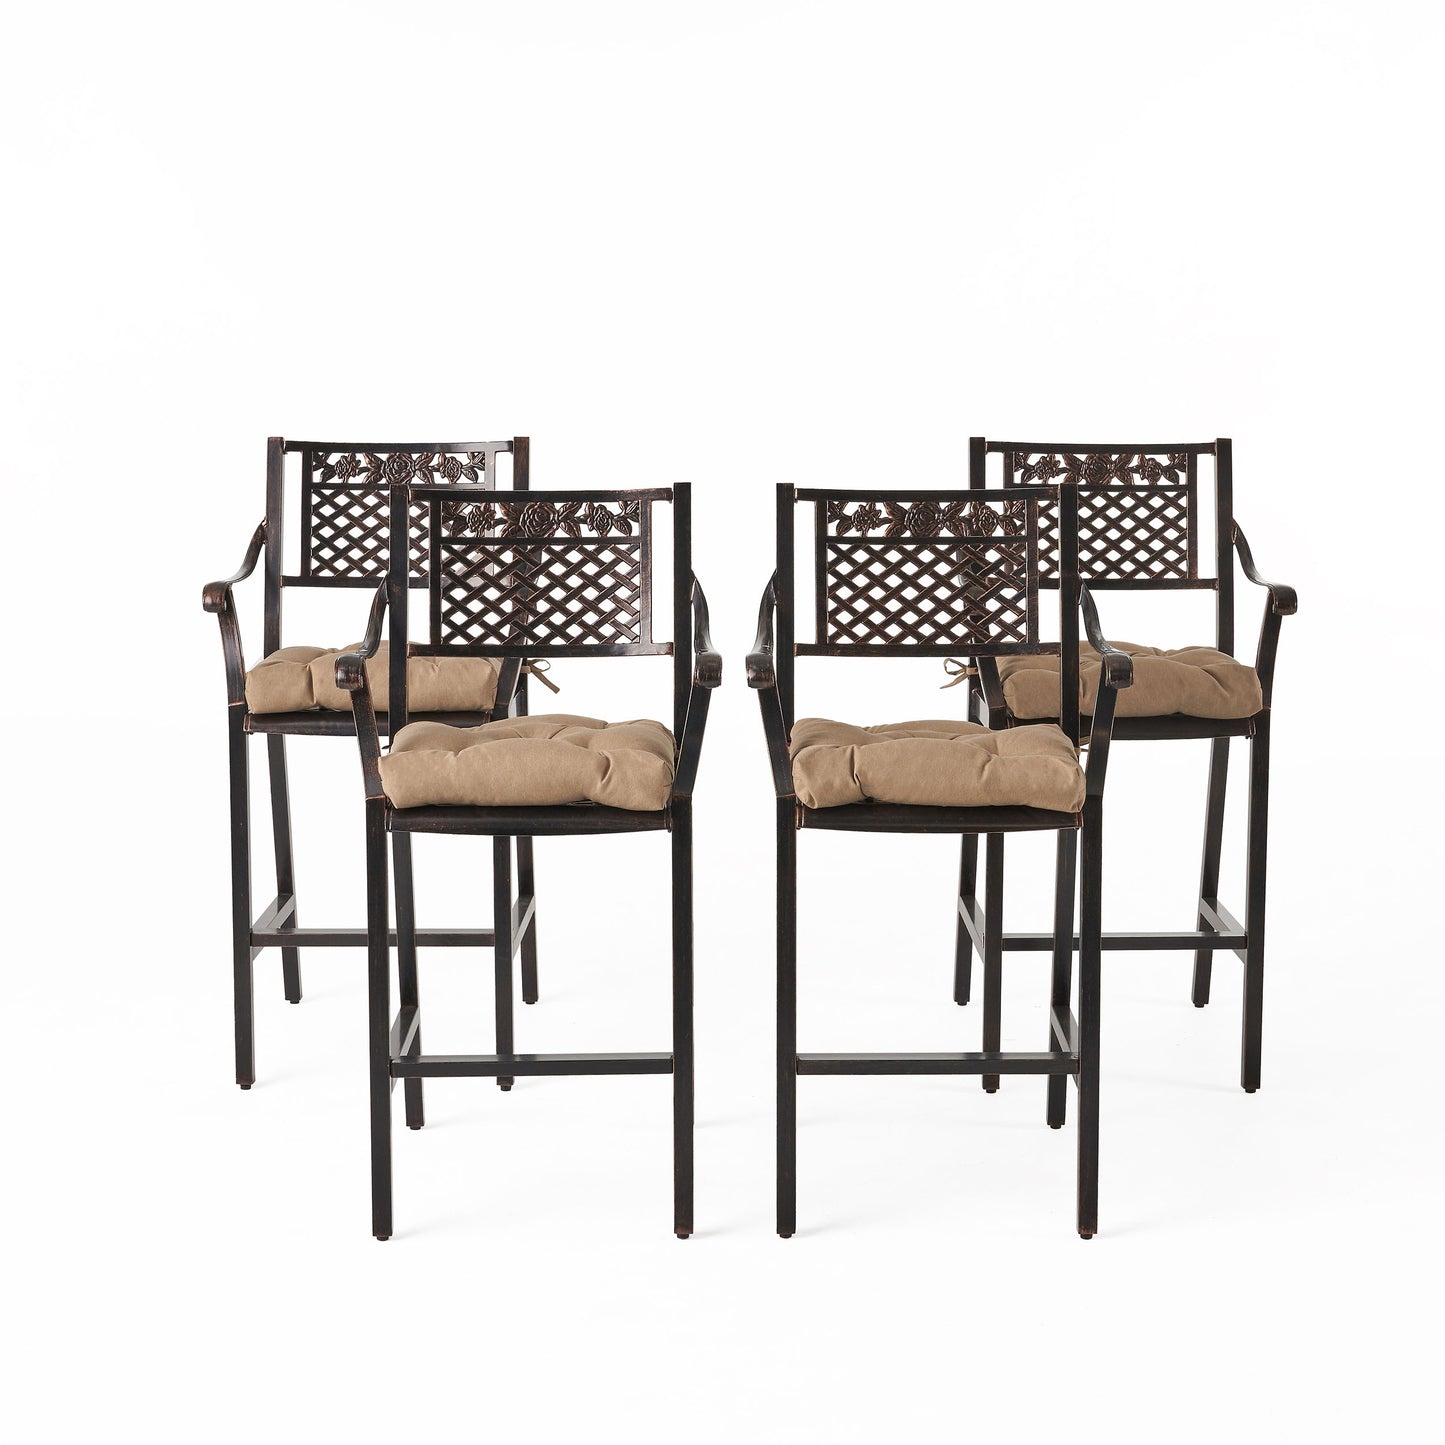 Renata Outdoor Barstool with Cushion (Set of 4)